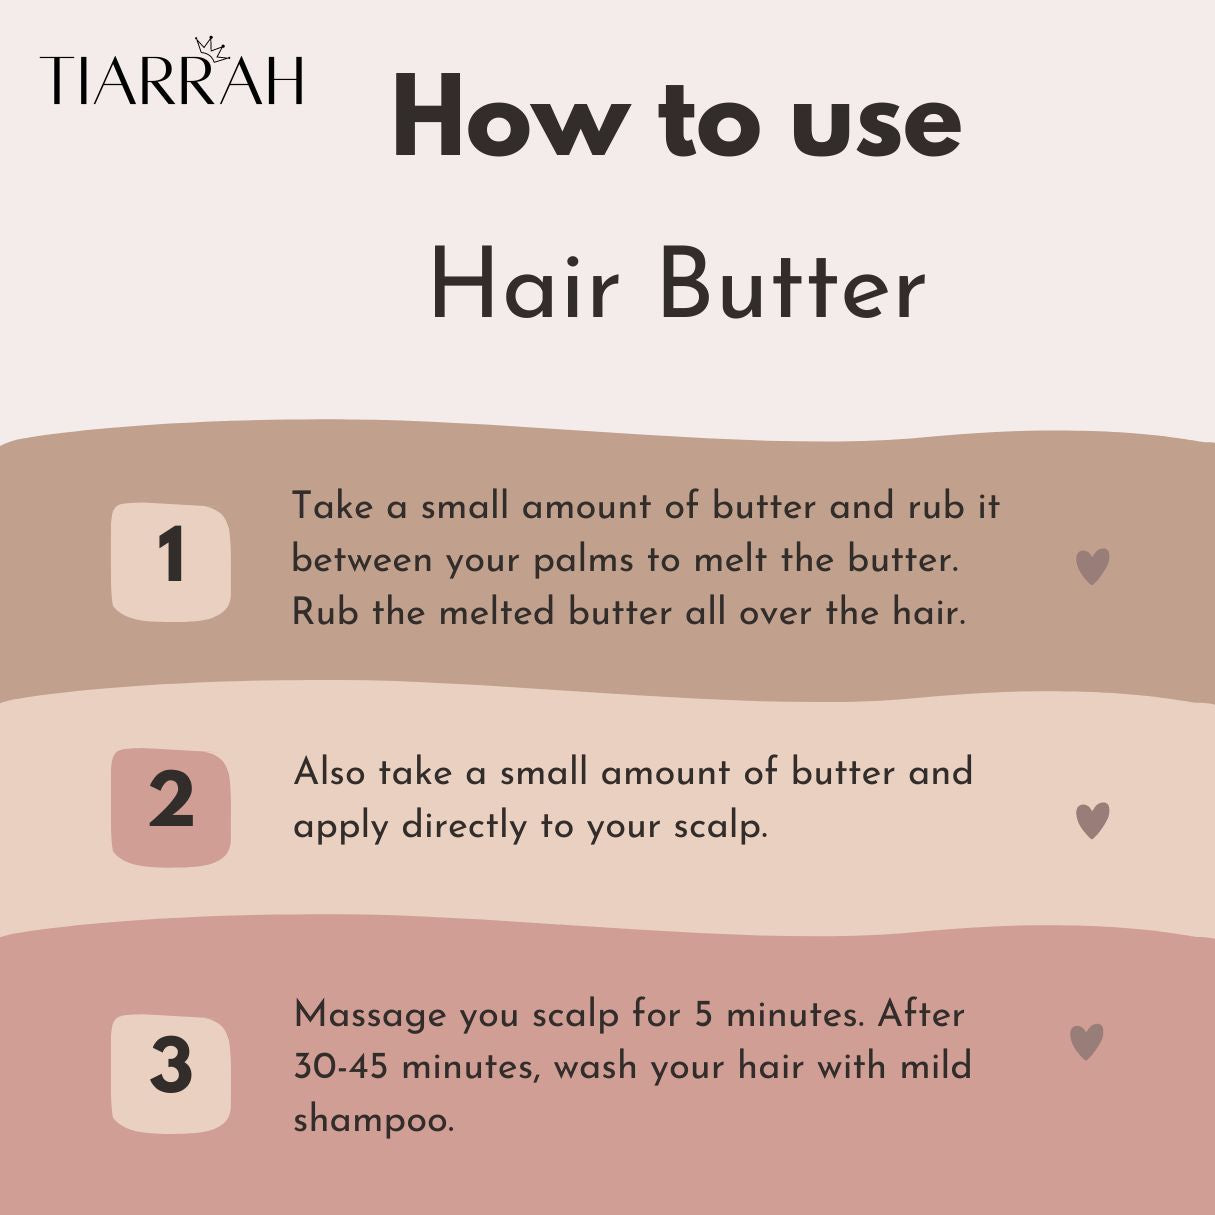 Organic Hair Butter from Tiarrah - The Luxury Bath and Body Care Shop